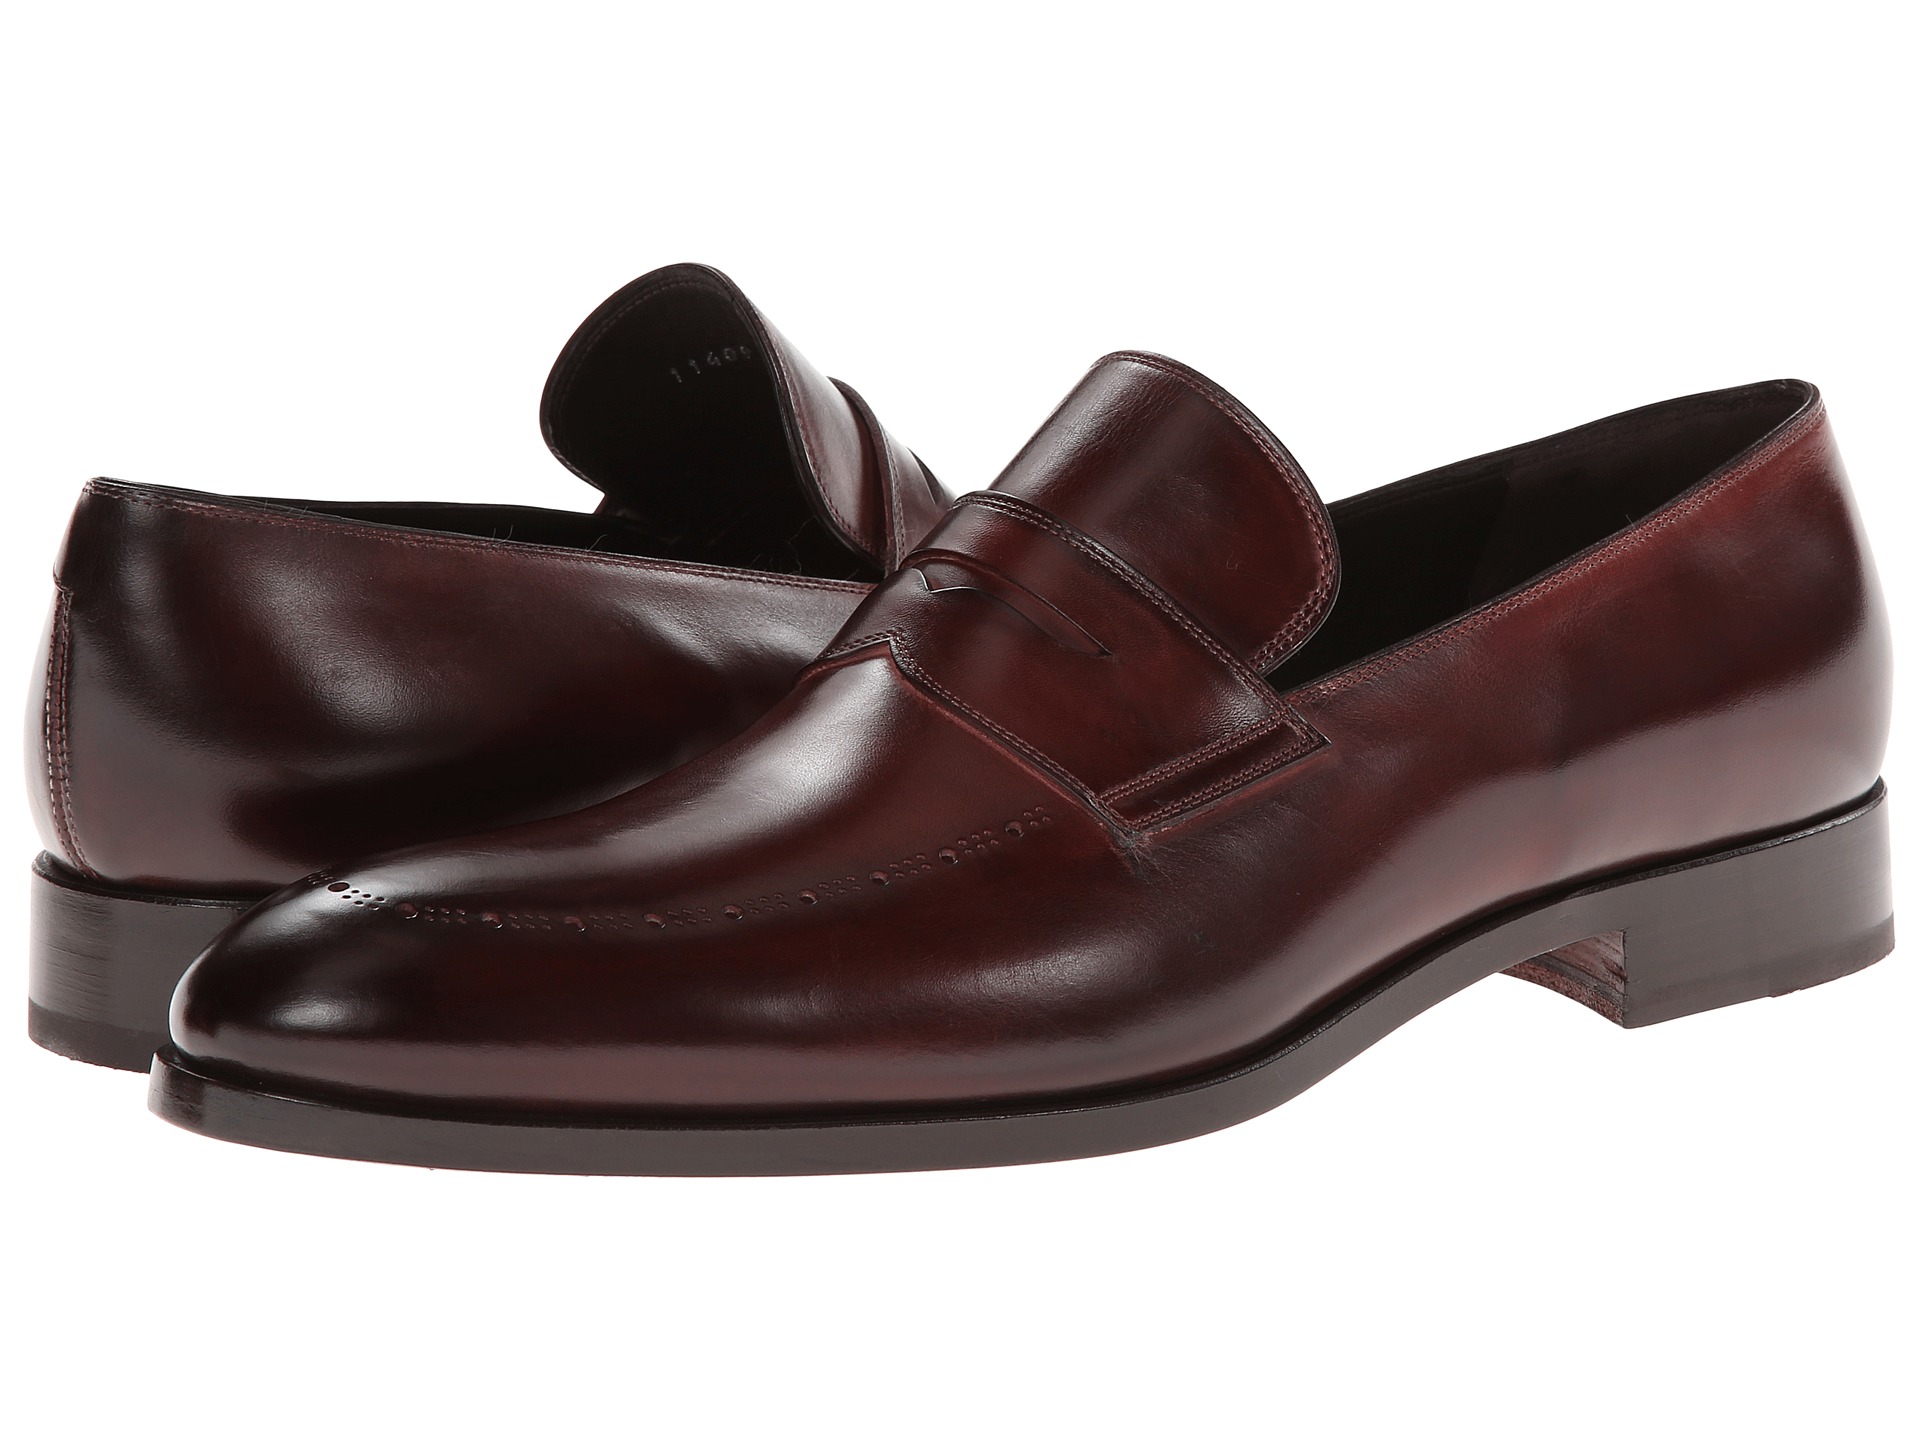 Fratelli Rossetti Penny Loafer Brown | Shipped Free at Zappos